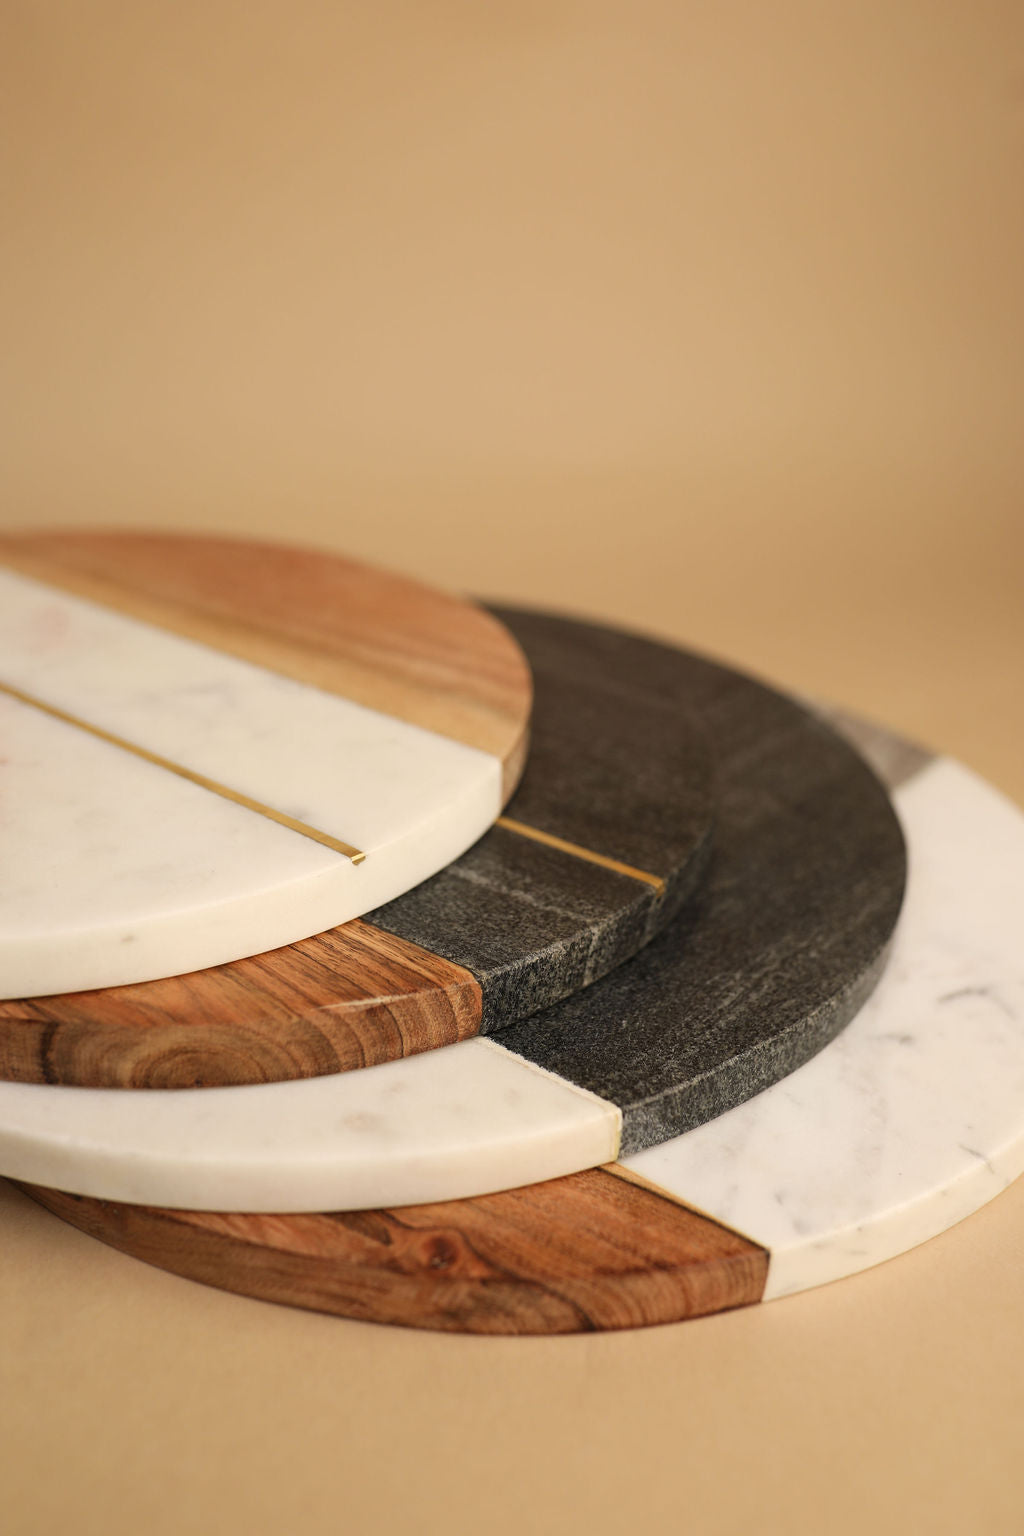 Round Marble And Wood Marble Cheeseboard With Gold Accent